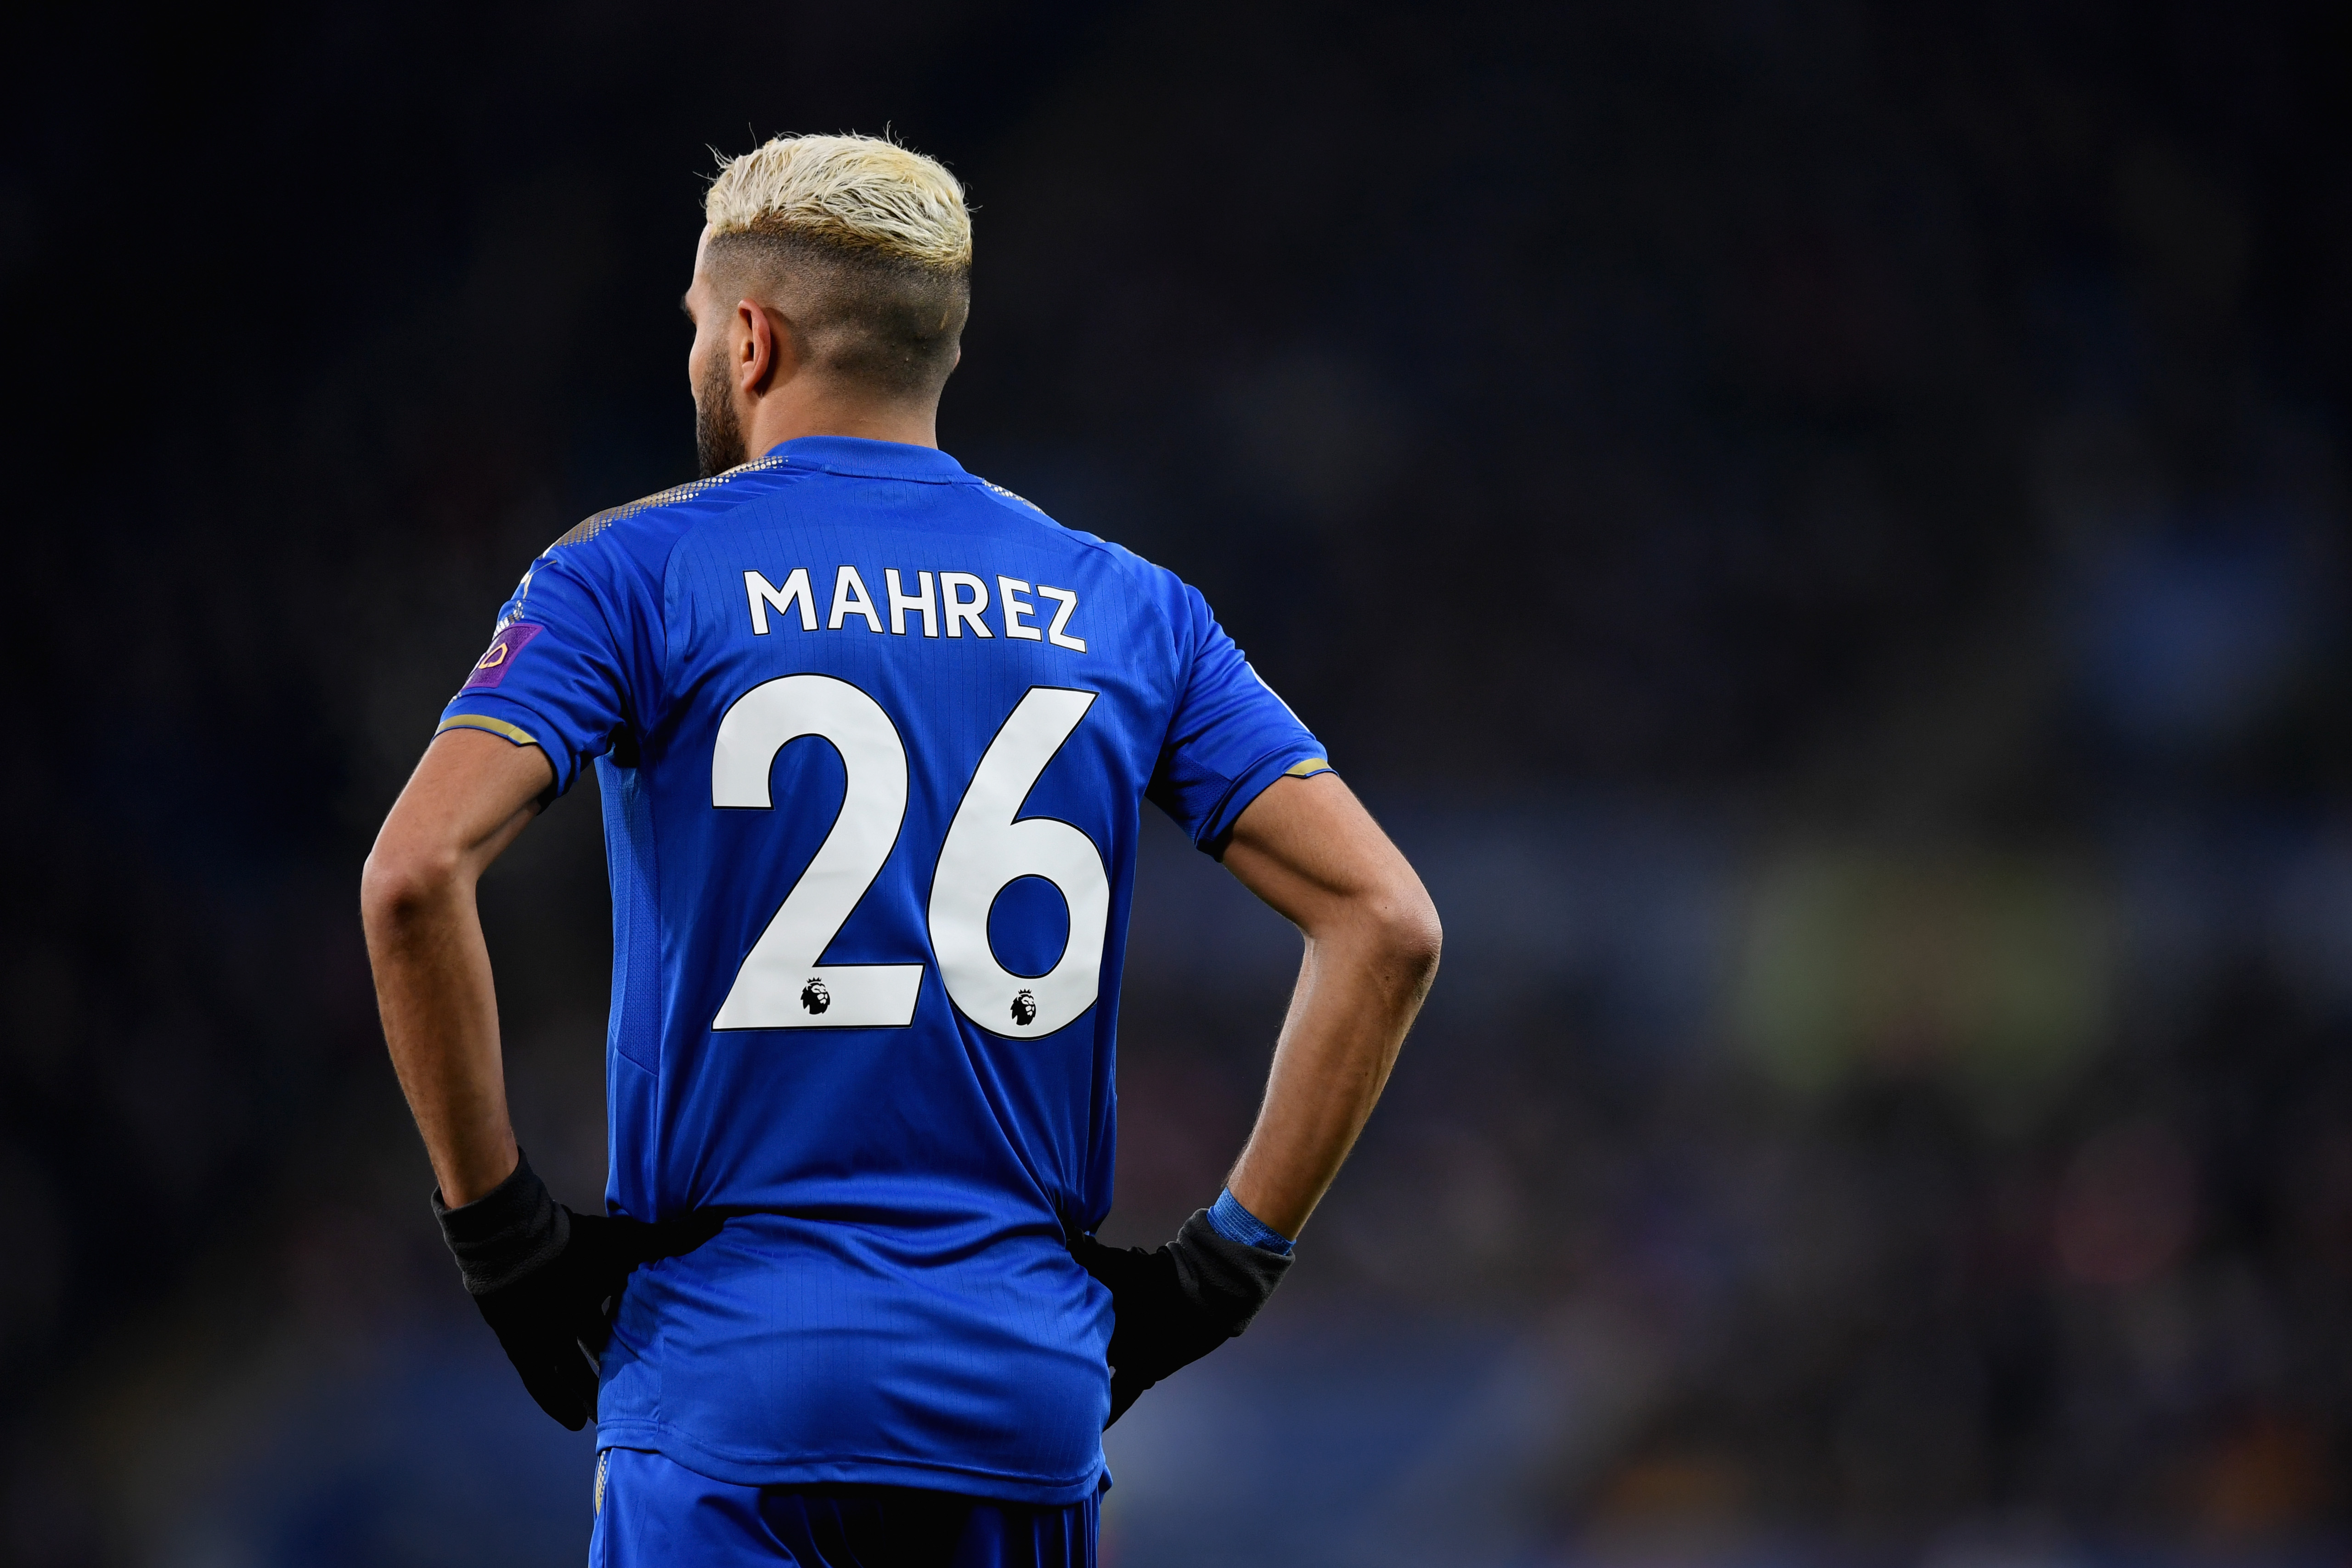 LEICESTER, ENGLAND - DECEMBER 23: Riyad Mahrez of Leicester in action during the Premier League match between Leicester City and Manchester United at The King Power Stadium on December 23, 2017 in Leicester, England. (Photo by Michael Regan/Getty Images)